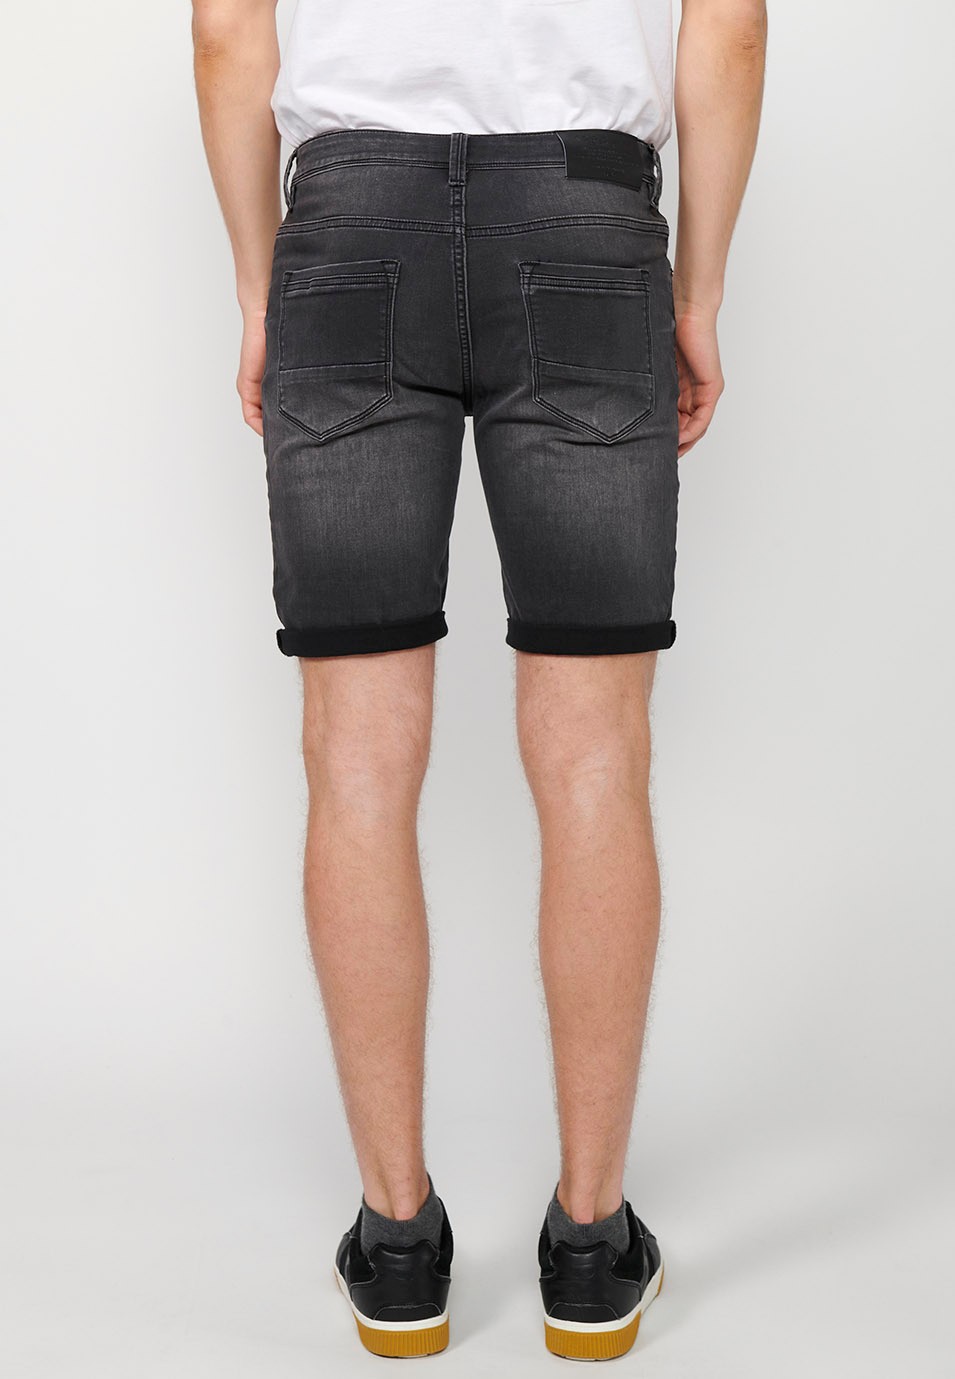 Shorts with turn-up finish with front closure with zipper and button in Black for Men 3